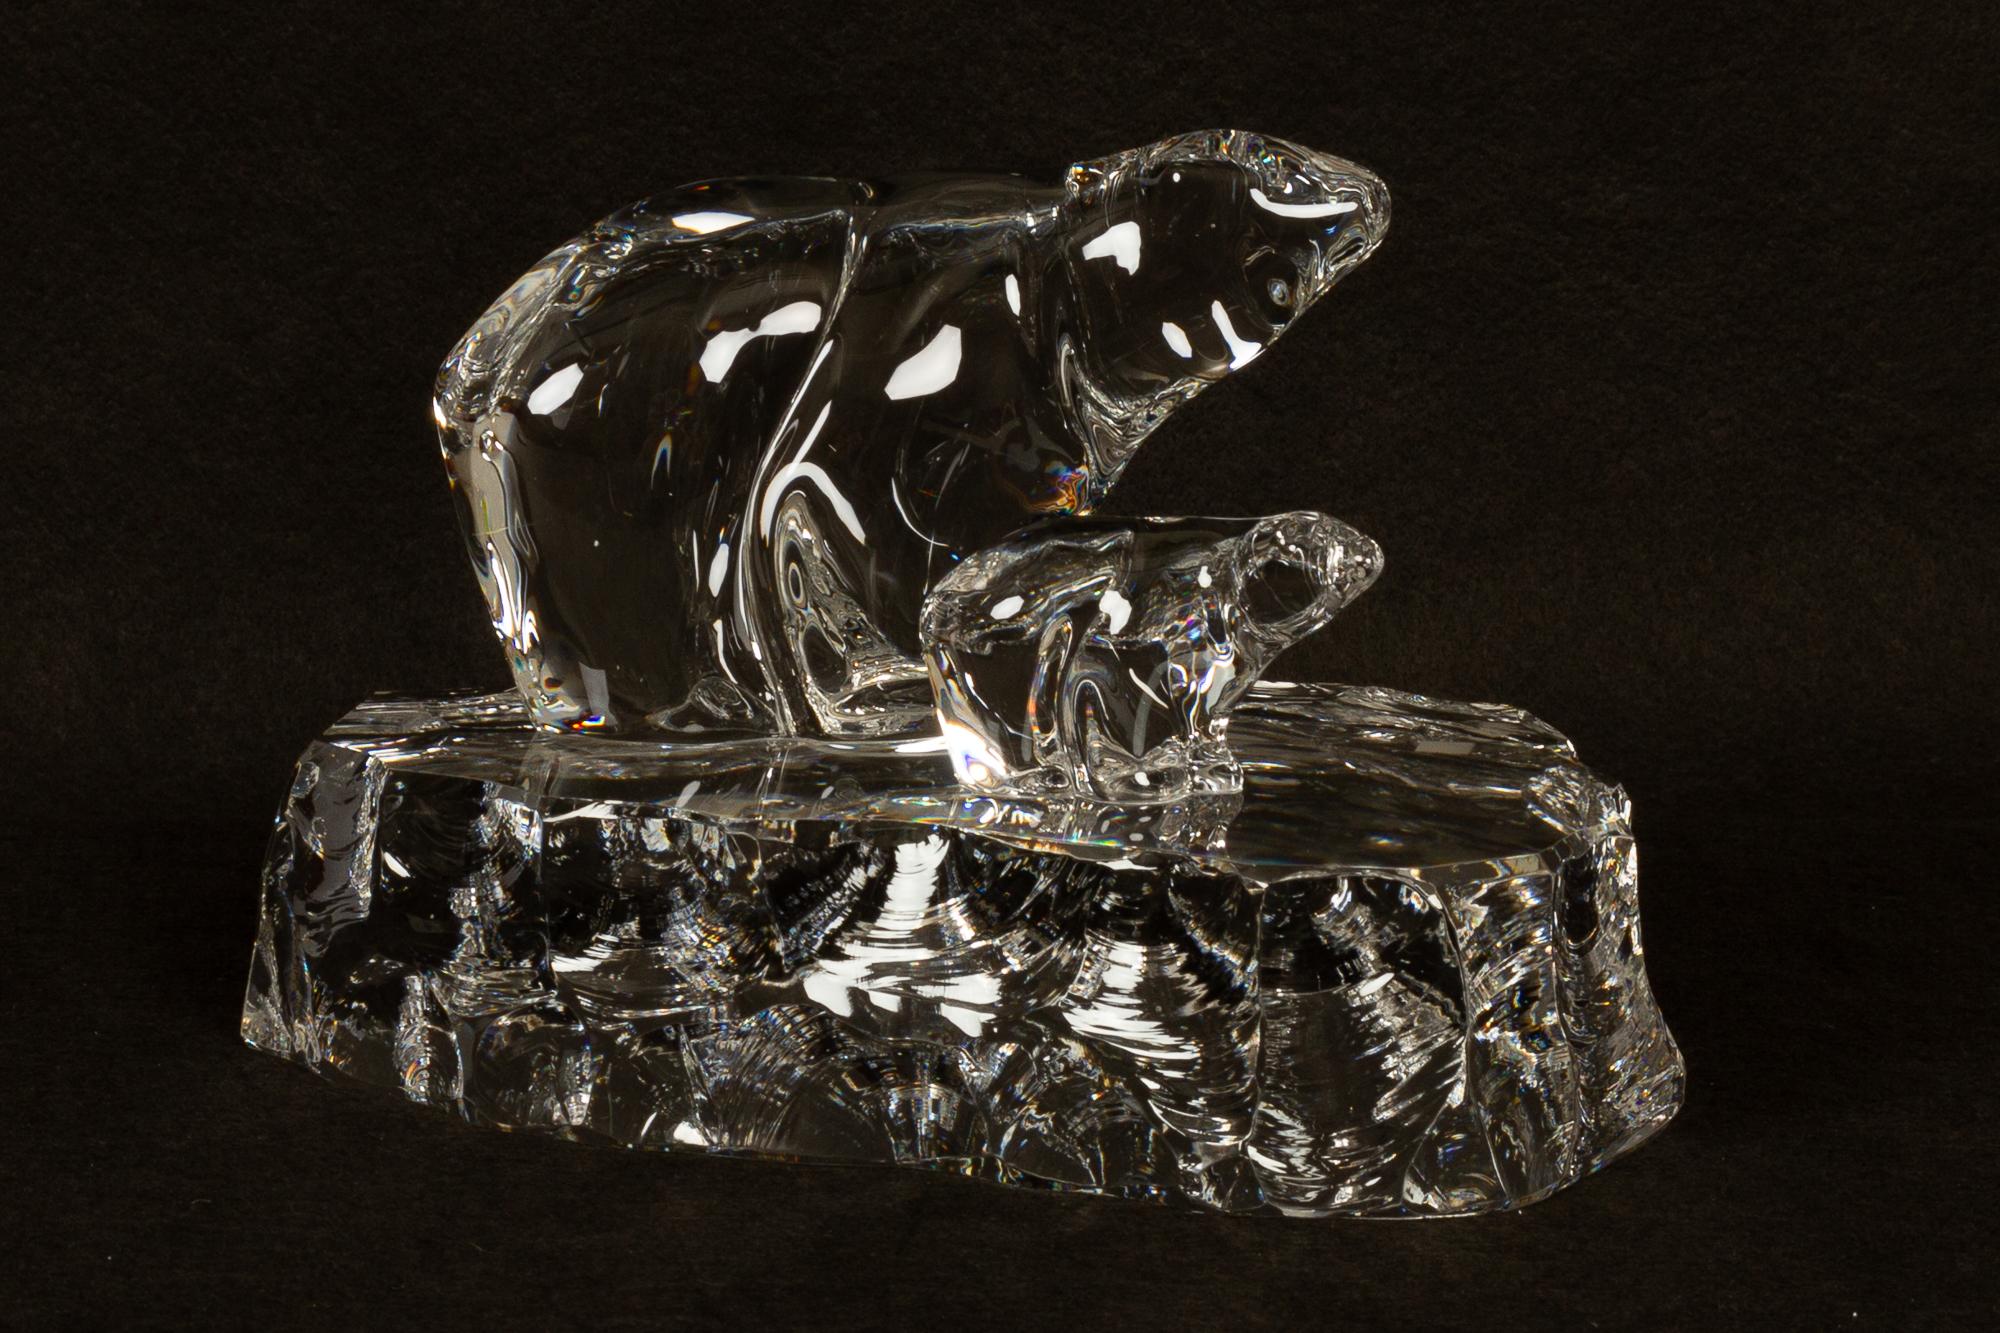 Scandinavian polar bear crystal figurine by Willy Johanson for Hadeland, mid-20th century.
Beautiful large crystal glass figurine of a mamma polar bear and her cub on the ice. Solid crystal glass, very clear and very heavy. Signed Hadeland WJ. Made